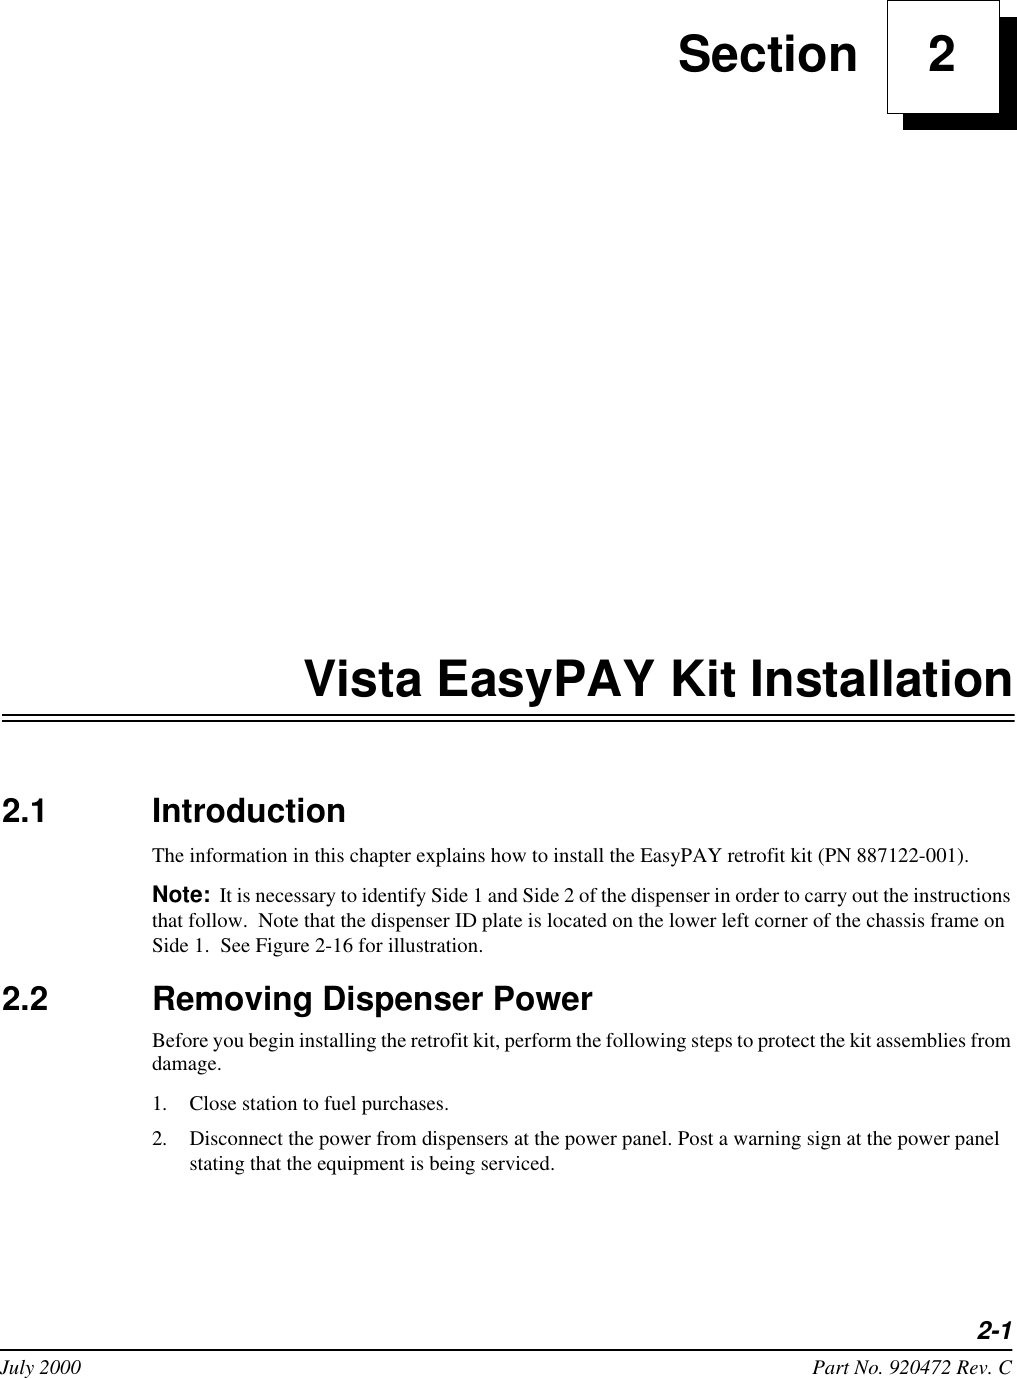 2-1July 2000 Part No. 920472 Rev. C Section     2Vista EasyPAY Kit Installation2.1 IntroductionThe information in this chapter explains how to install the EasyPAY retrofit kit (PN 887122-001). Note: It is necessary to identify Side 1 and Side 2 of the dispenser in order to carry out the instructions that follow.  Note that the dispenser ID plate is located on the lower left corner of the chassis frame on Side 1.  See Figure 2-16 for illustration.2.2 Removing Dispenser PowerBefore you begin installing the retrofit kit, perform the following steps to protect the kit assemblies from damage. 1. Close station to fuel purchases.2. Disconnect the power from dispensers at the power panel. Post a warning sign at the power panel stating that the equipment is being serviced.